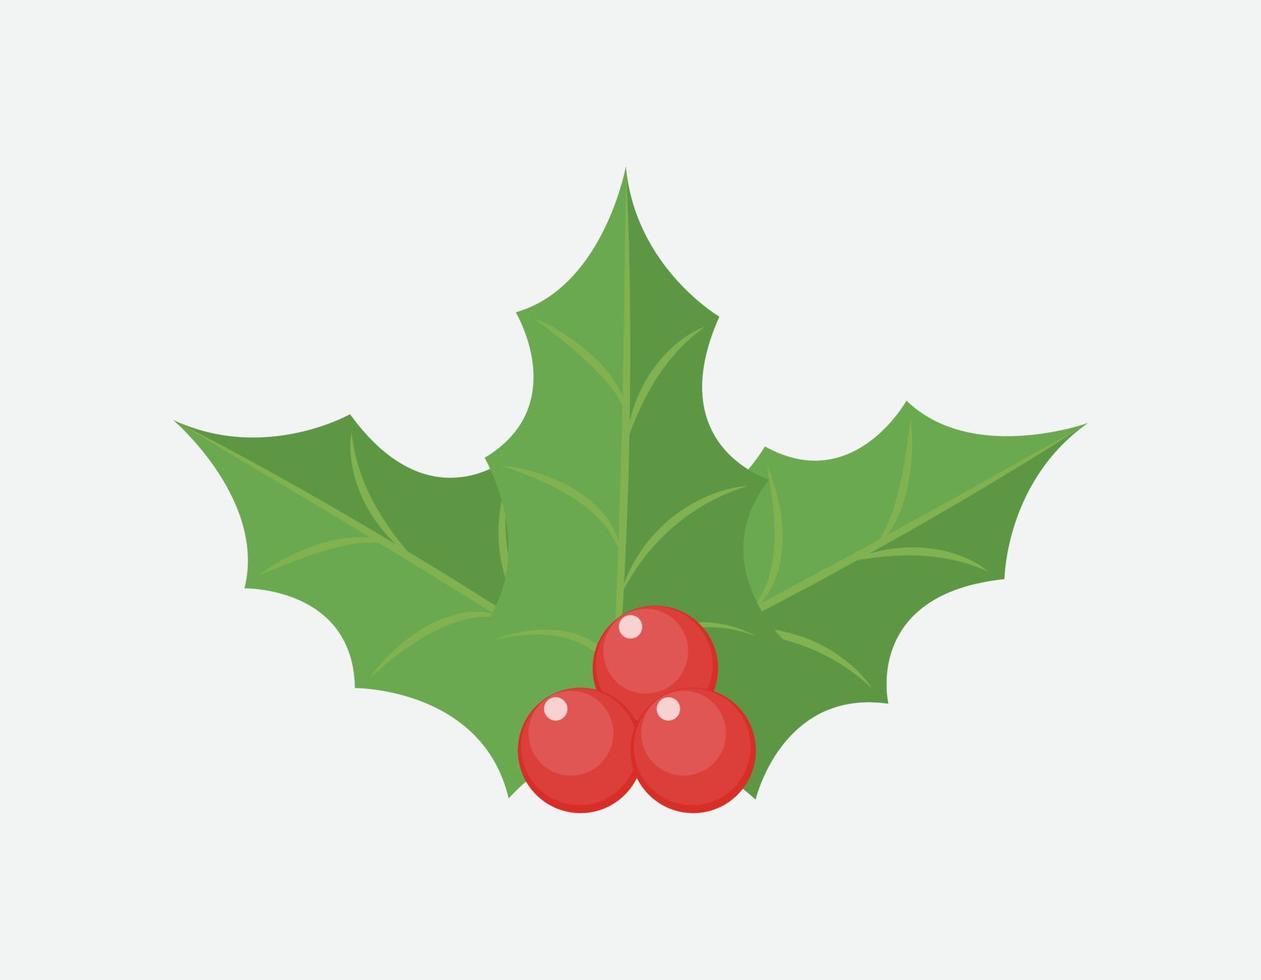 Elements of Christmas holly with berries, Christmas plants, vector cartoon style